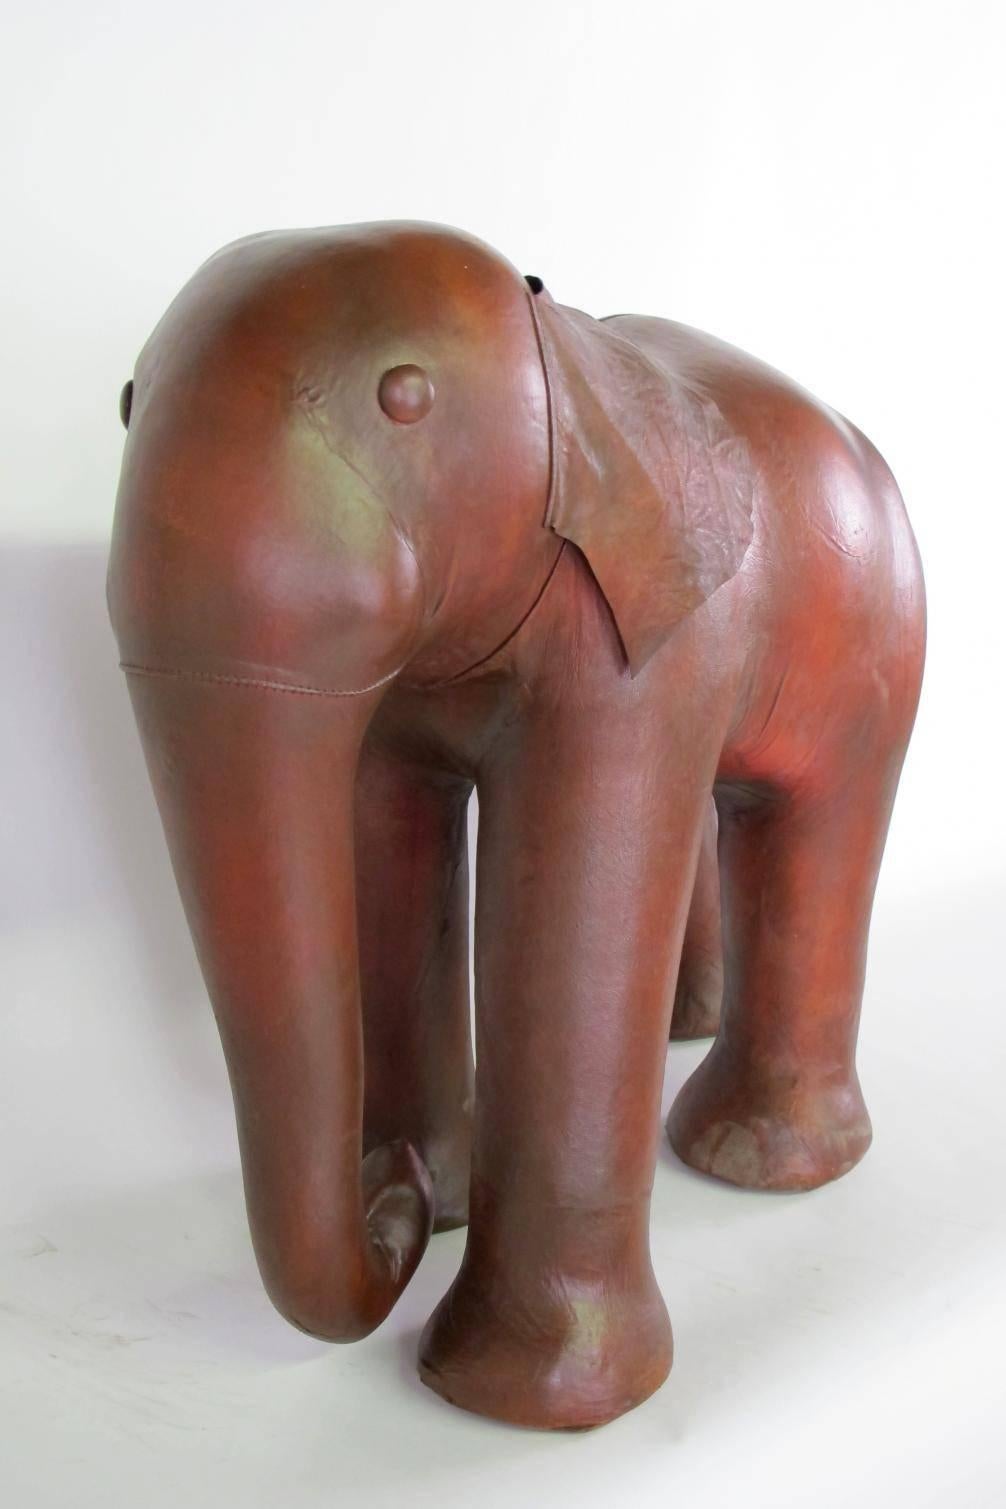 Originally produced in Kenya, this vintage leather elephant is stout enough to be used as additional seating or as a footstool with a substantial weight and smooth leather finish. Ears can either lay flat or we like the whimsical look in the gallery